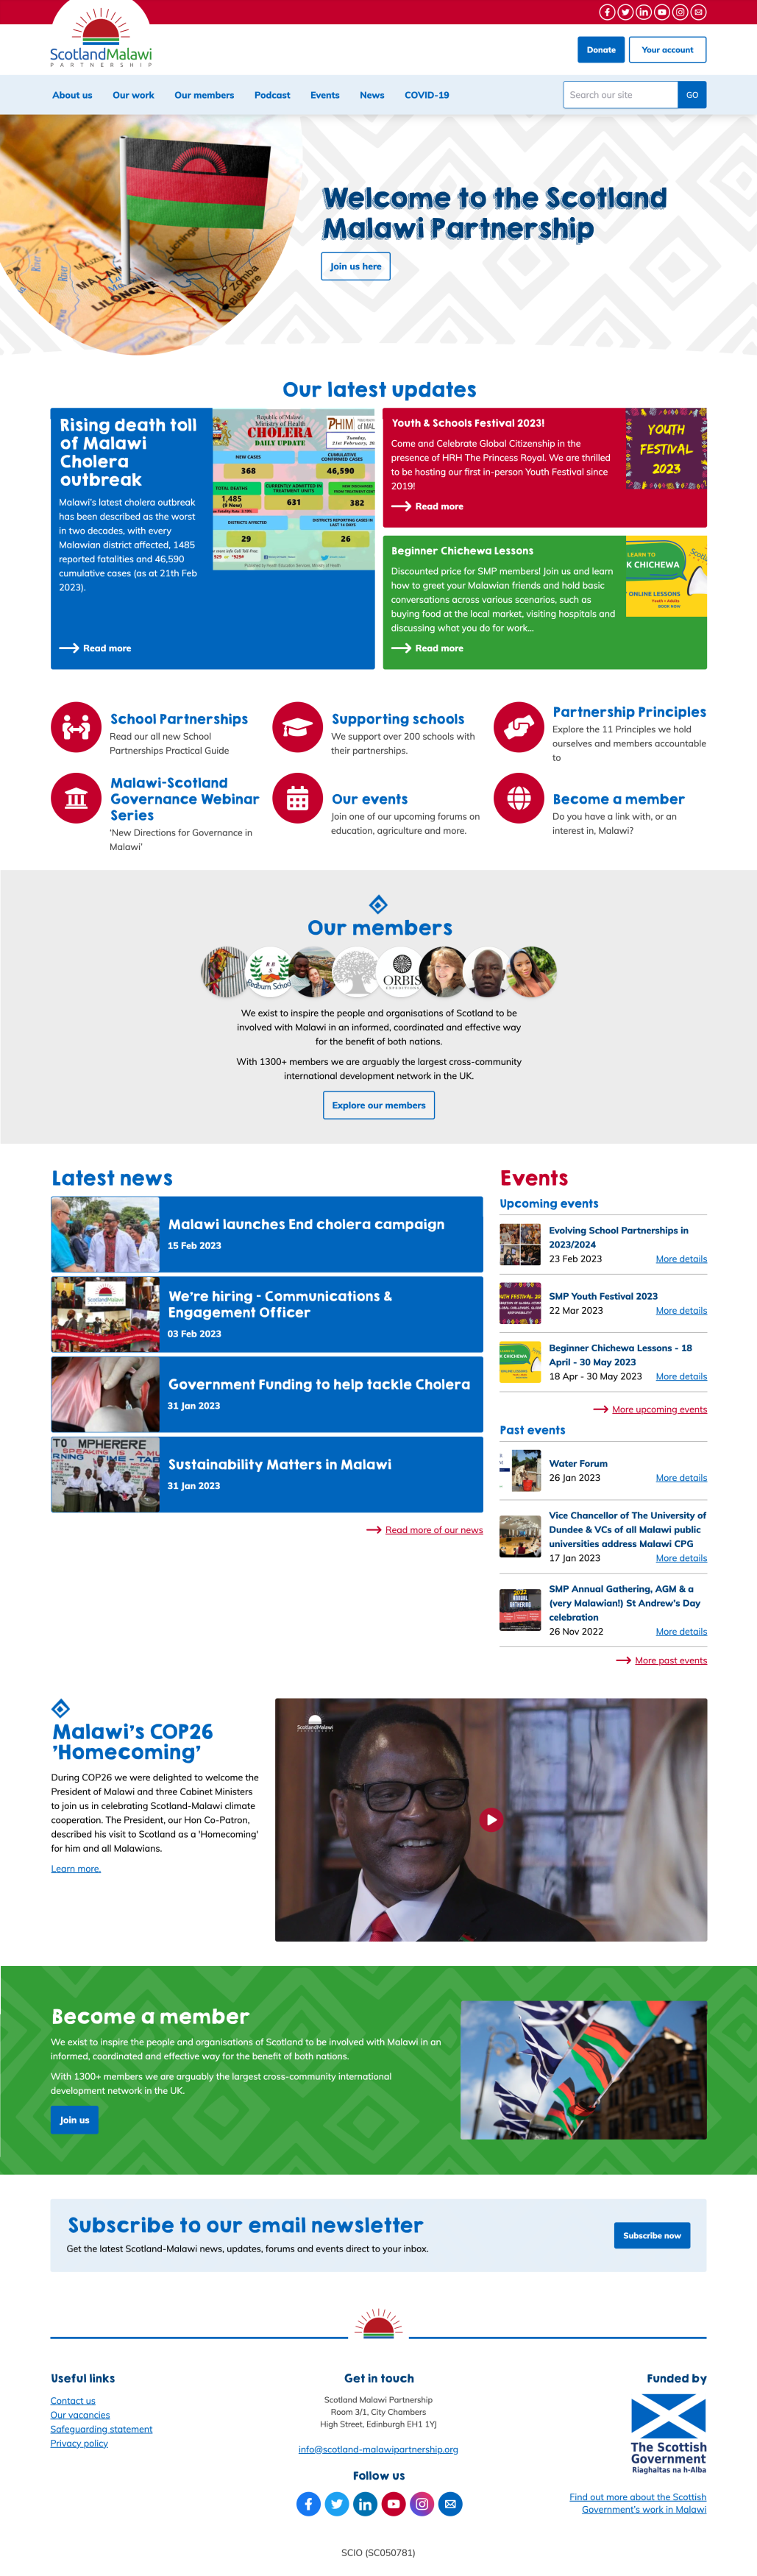 SMP homepage